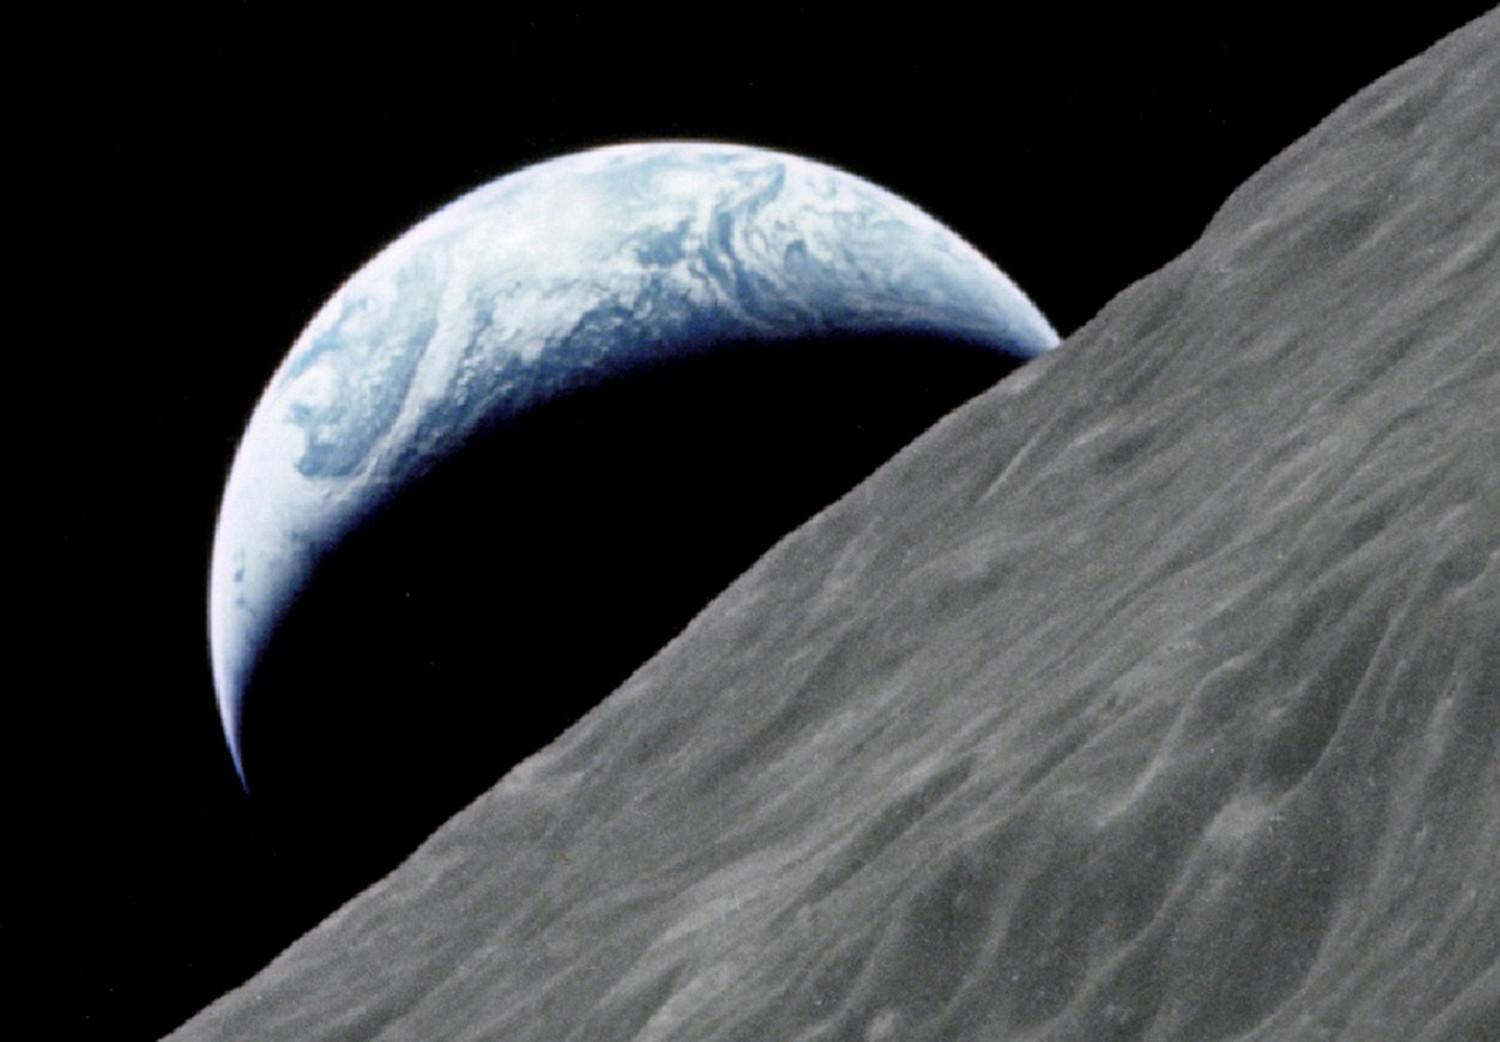 Canvas View of the Earth from the moon - a cosmic planet and cosmos landscape